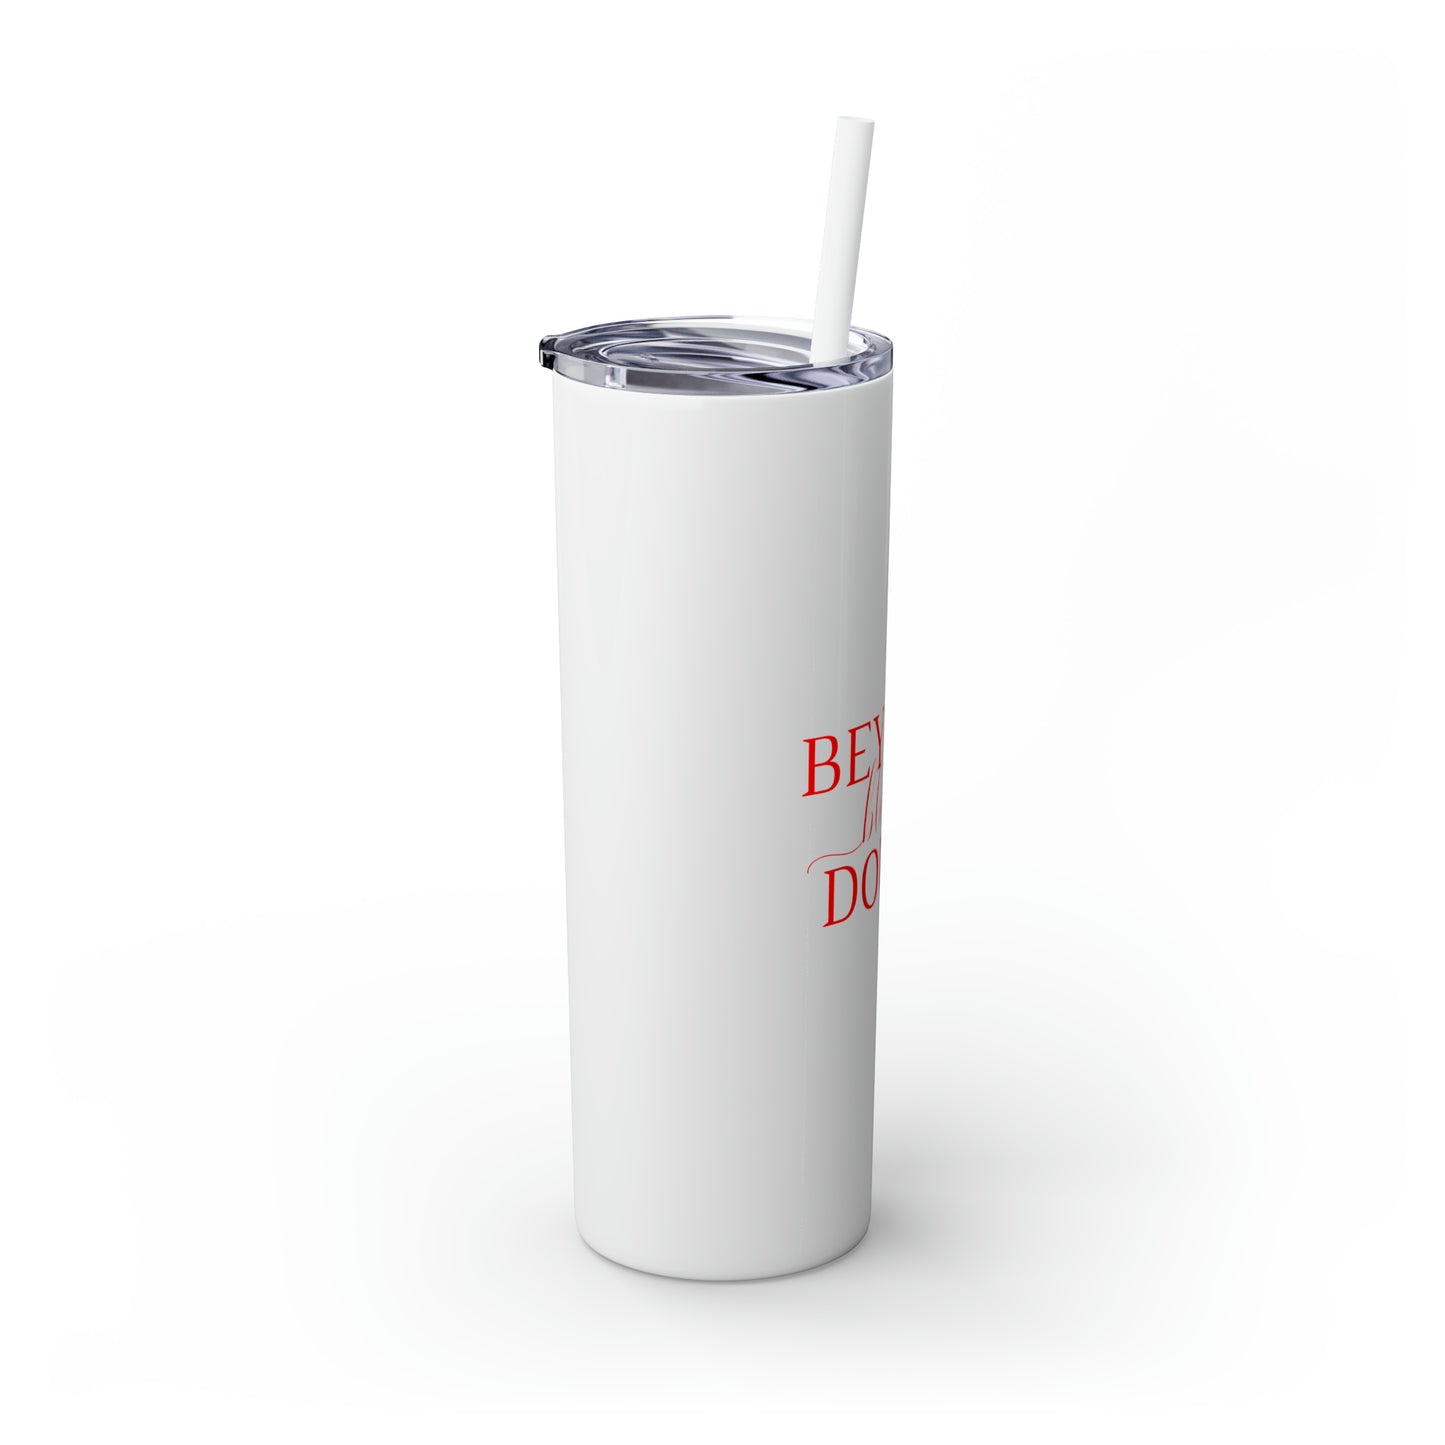 Beyond Blessed Doula - Plain Skinny Tumbler with Straw, 20oz - Red